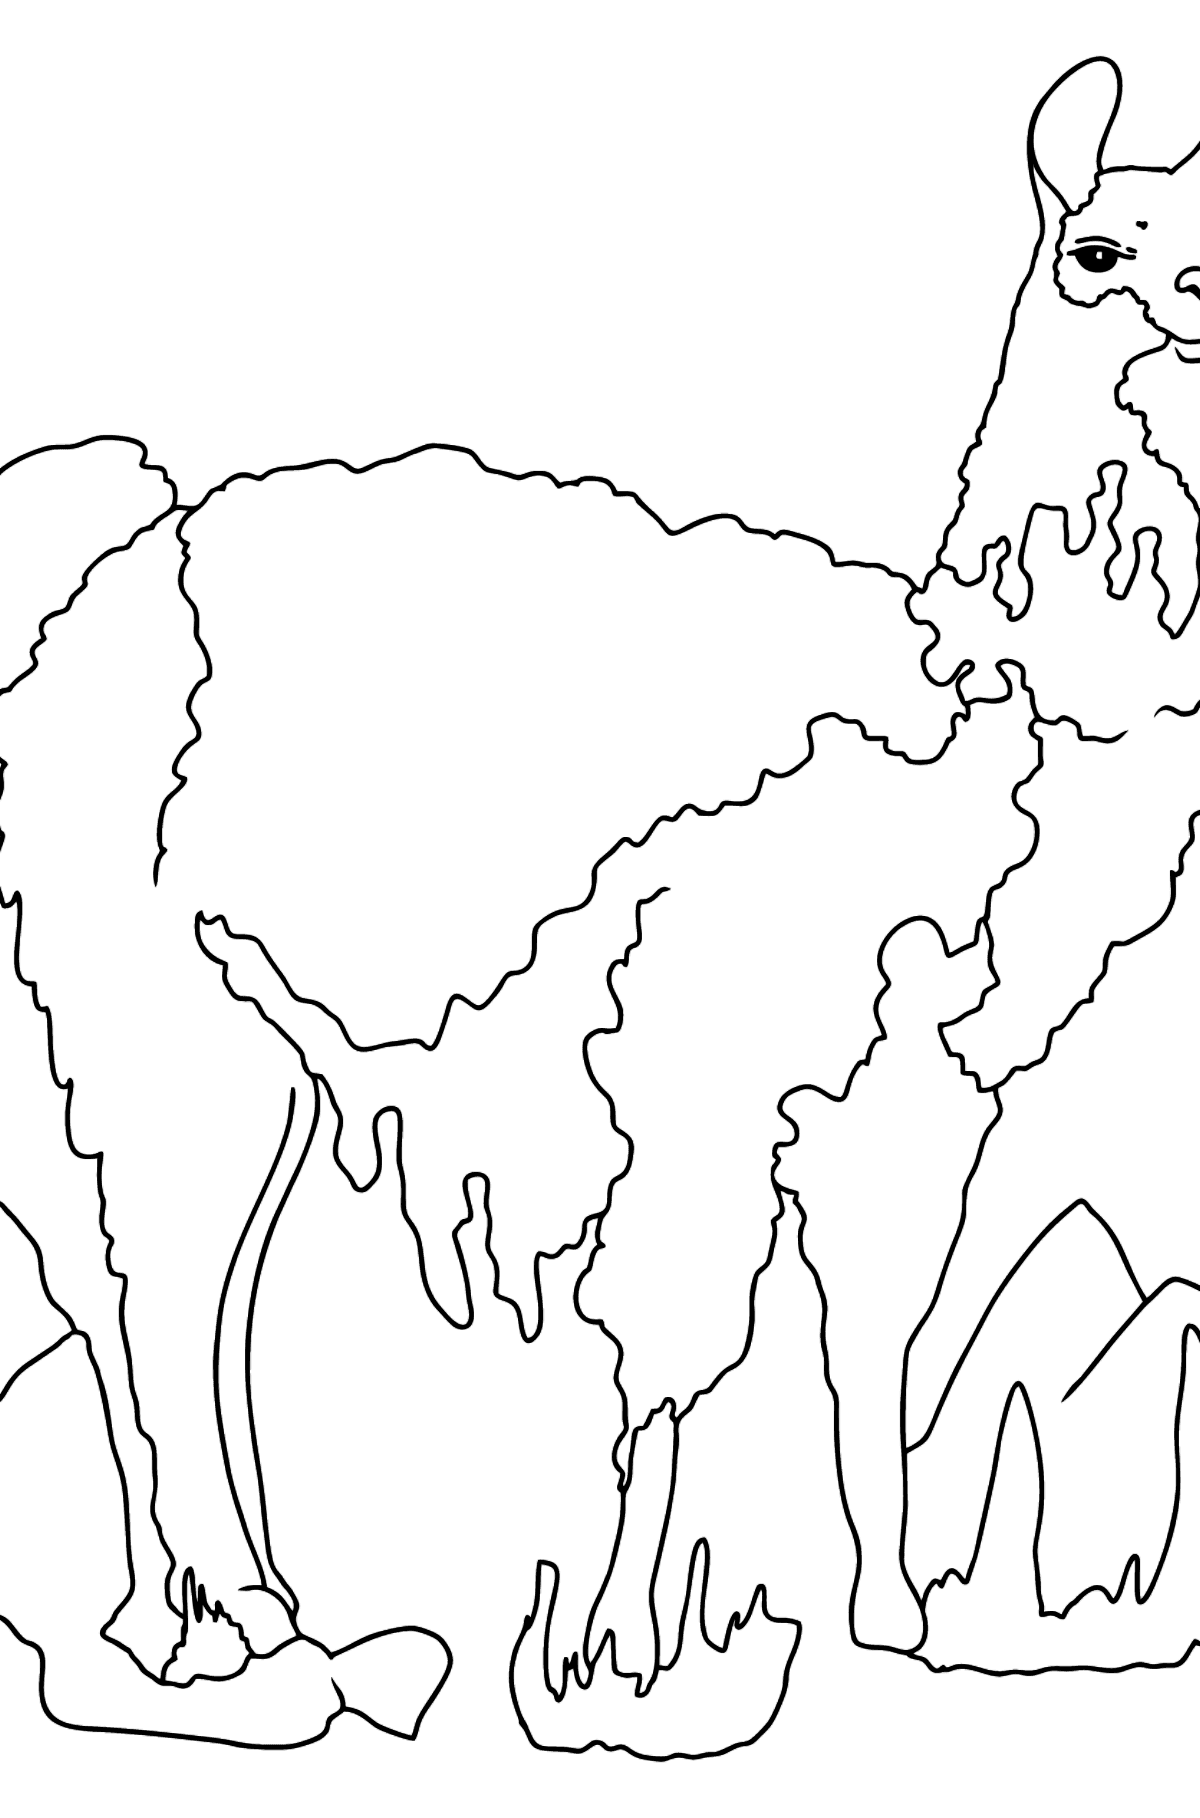 Coloring Page - A Lama is Inspecting the Area - Coloring Pages for Kids